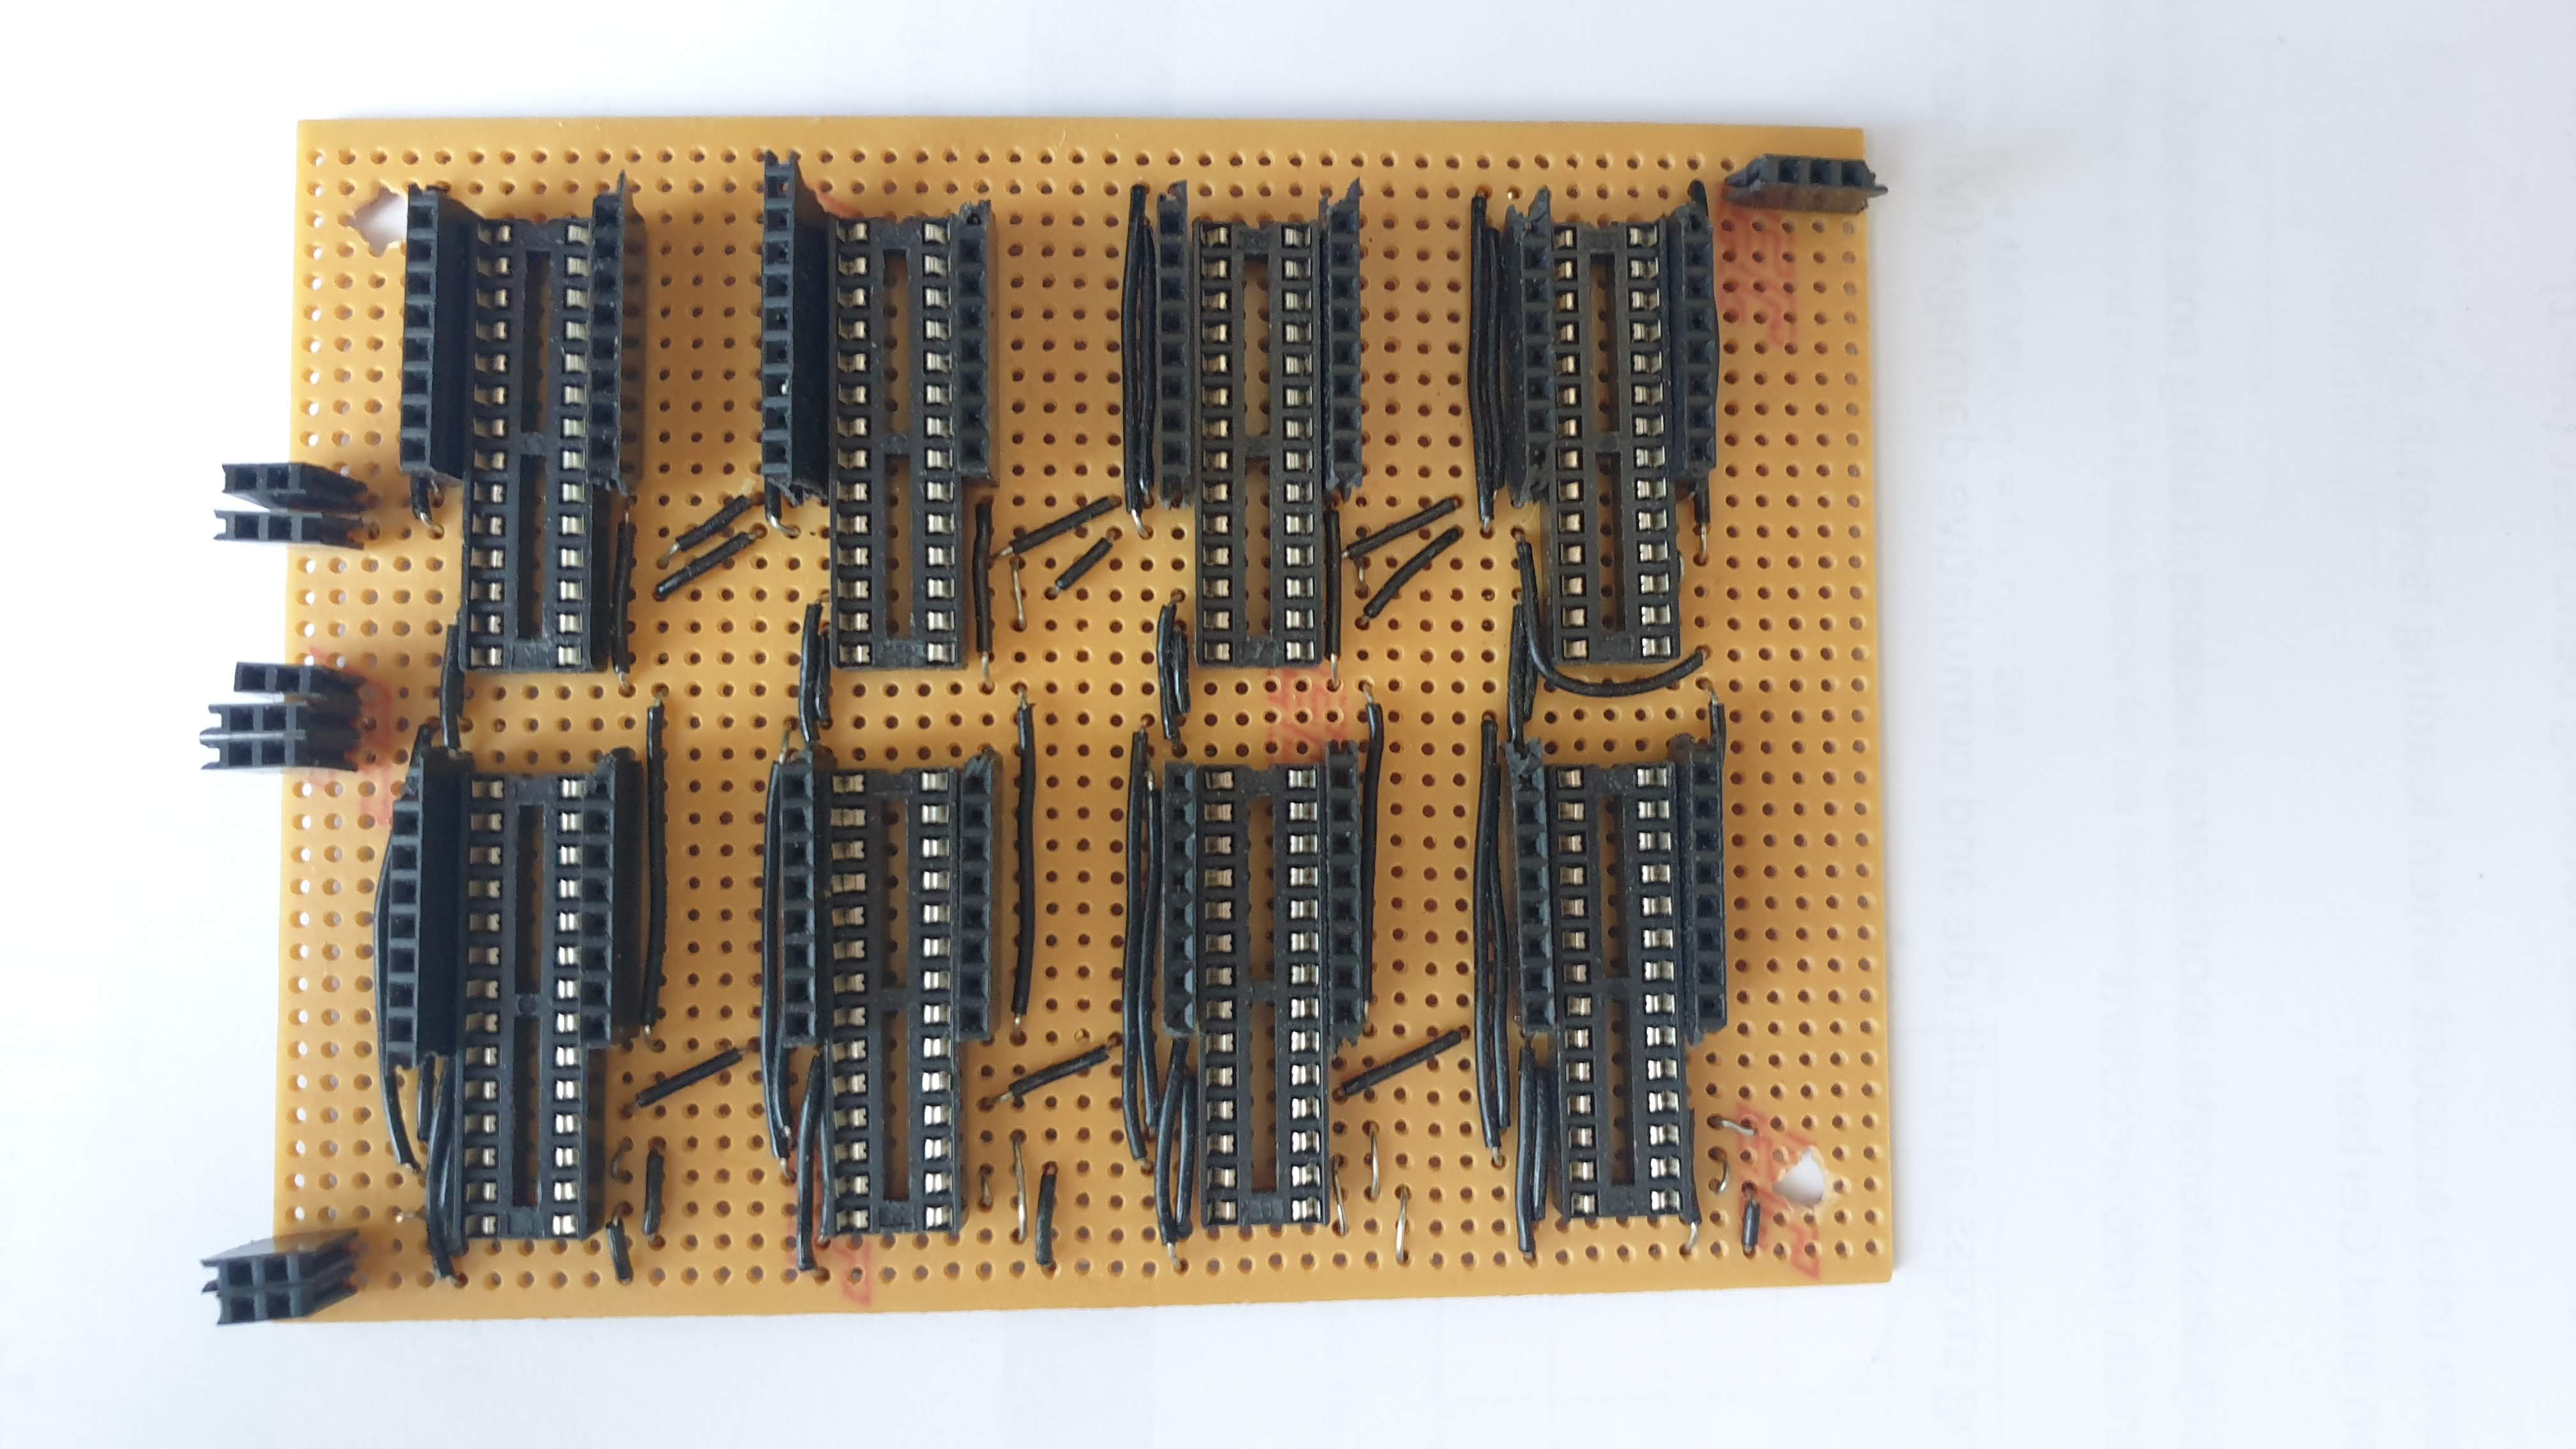 Image of prototype stripboard with MCP chips